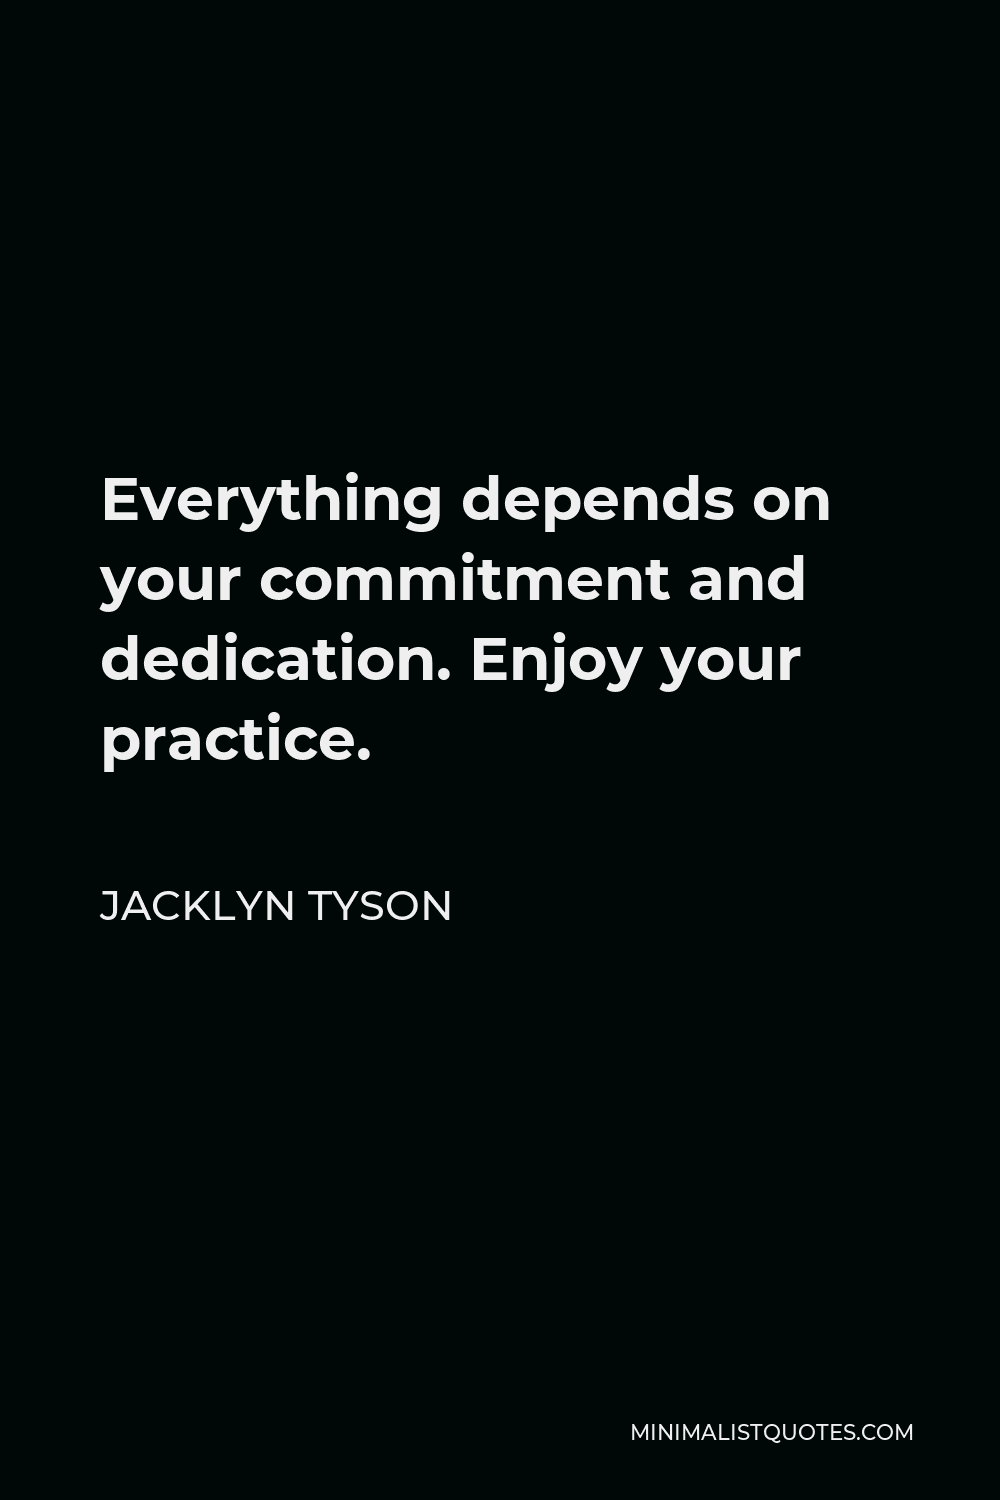 Jacklyn Tyson Quote Everything Depends On Your Commitment And Dedication Enjoy Your Practice